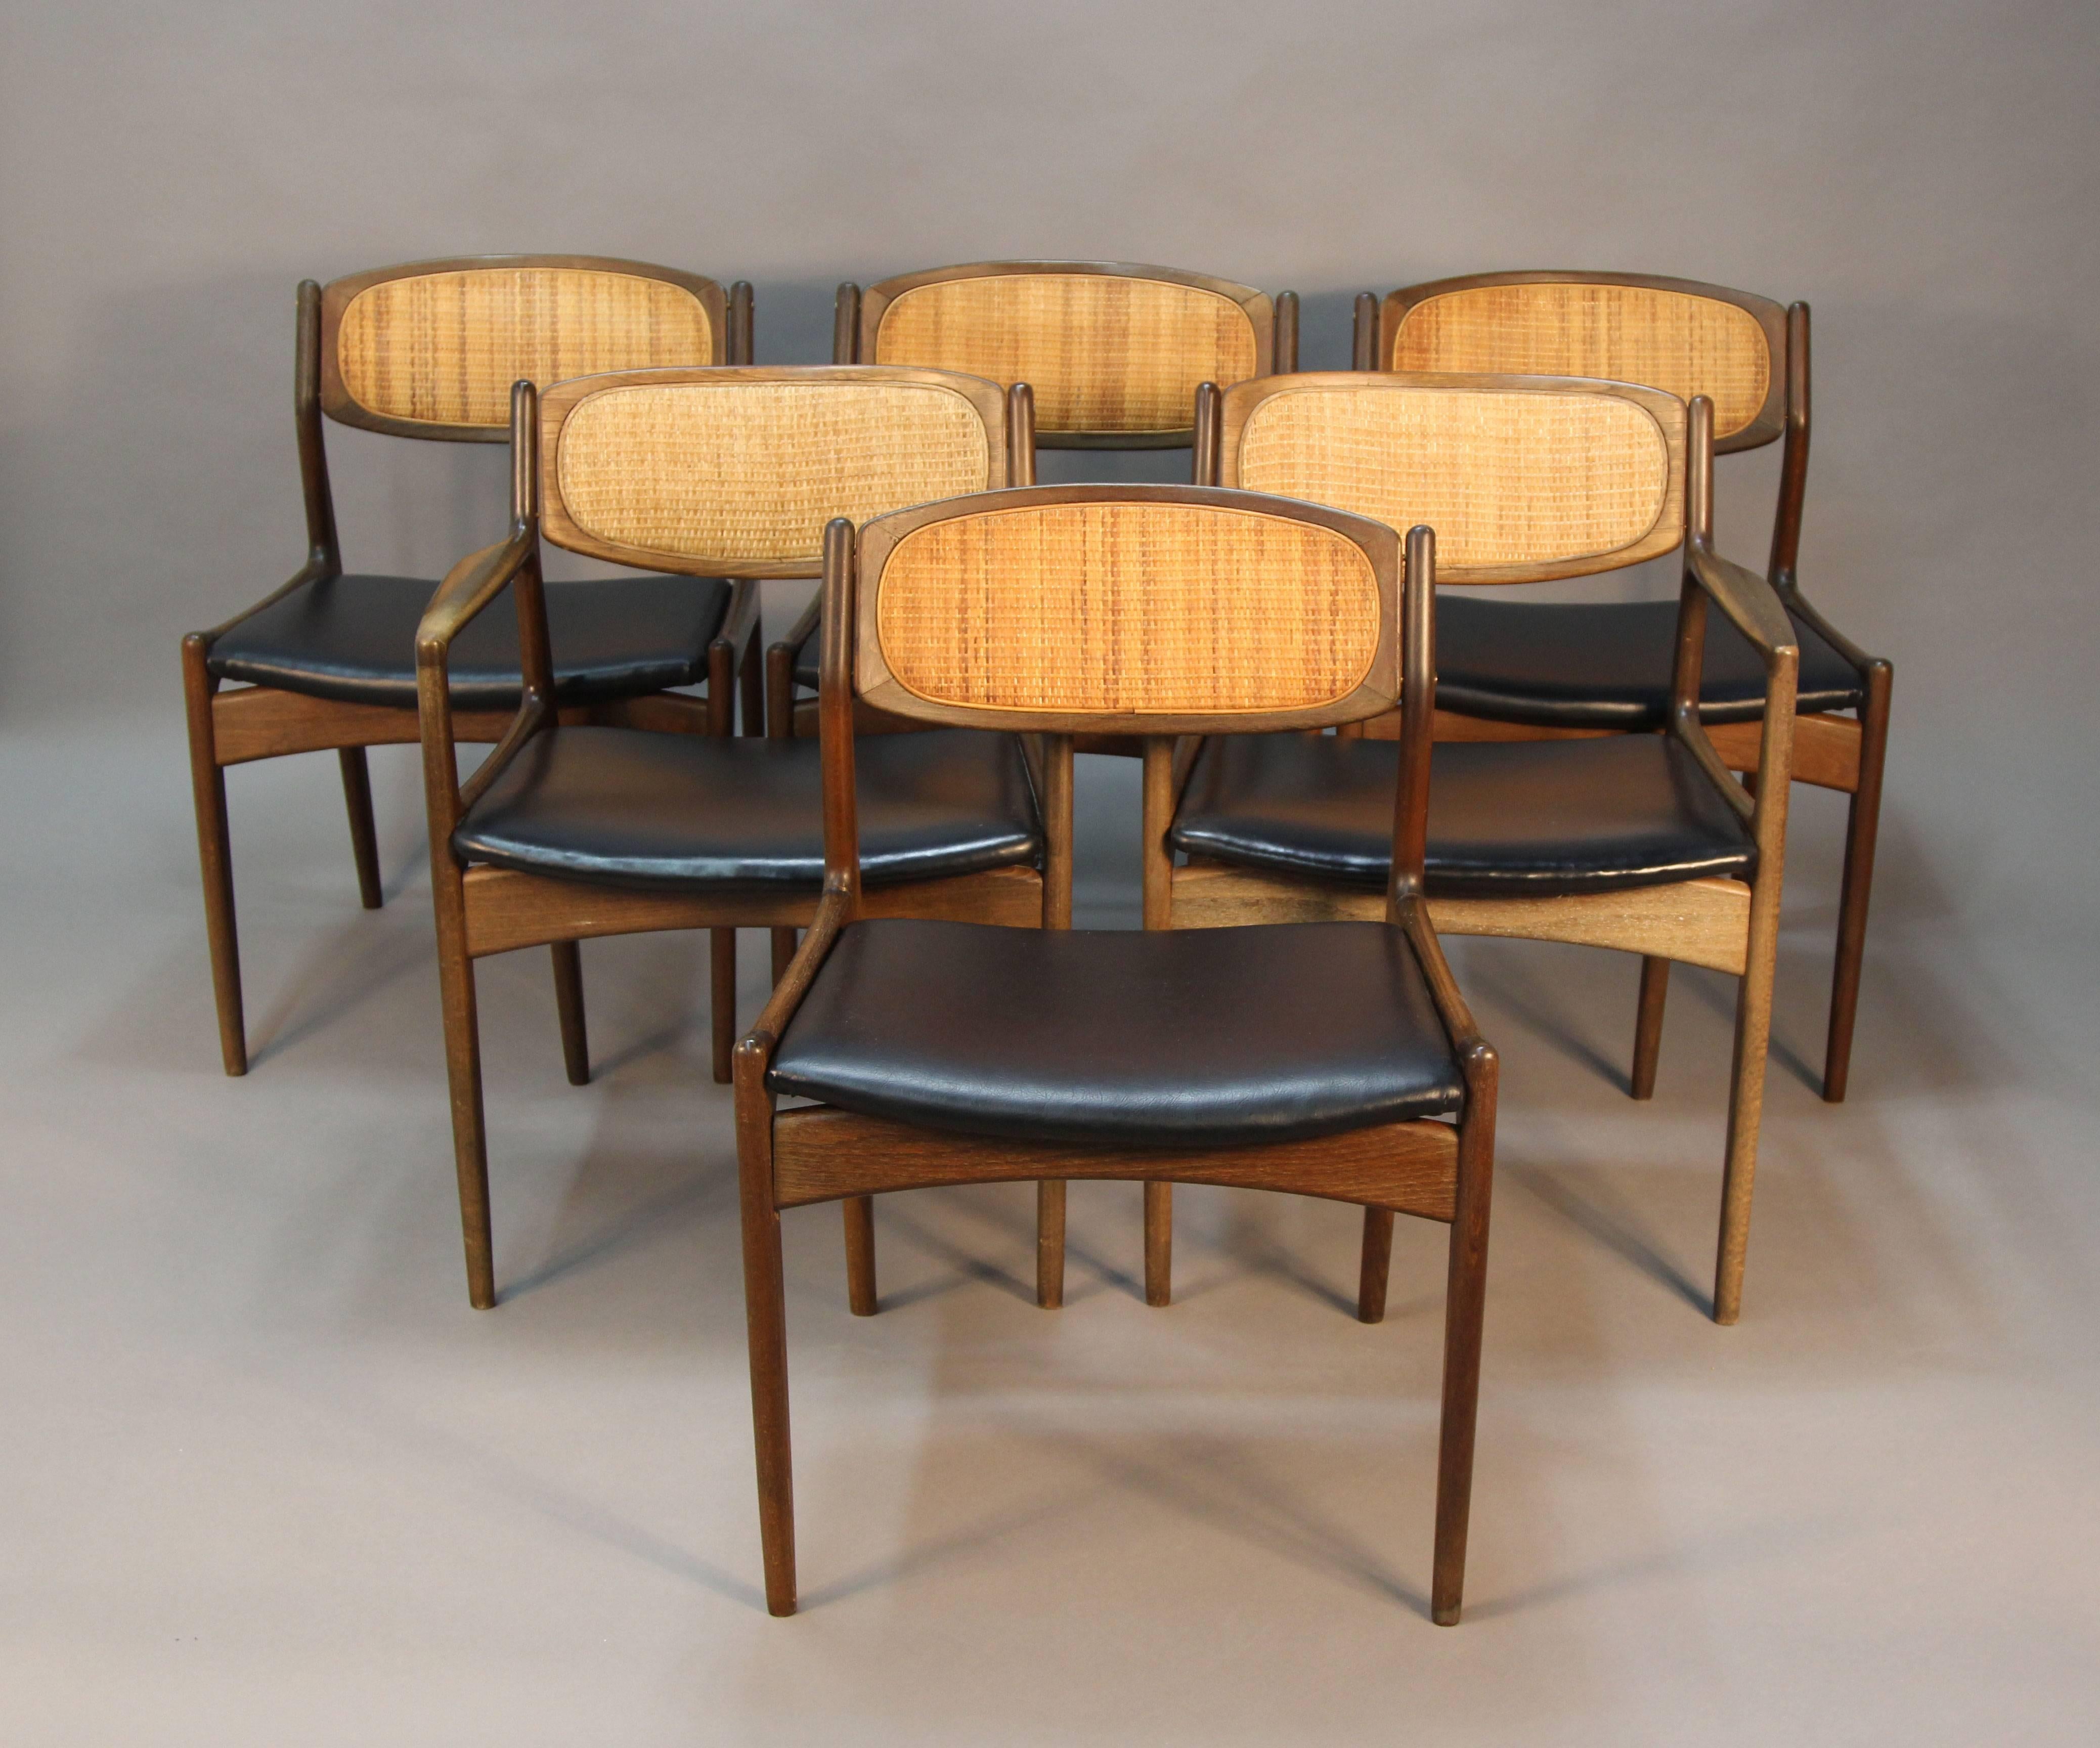 Signed Selig, these dining chairs are in excellent condition, no issues with any caning. Walnut frames with vinyl seats.